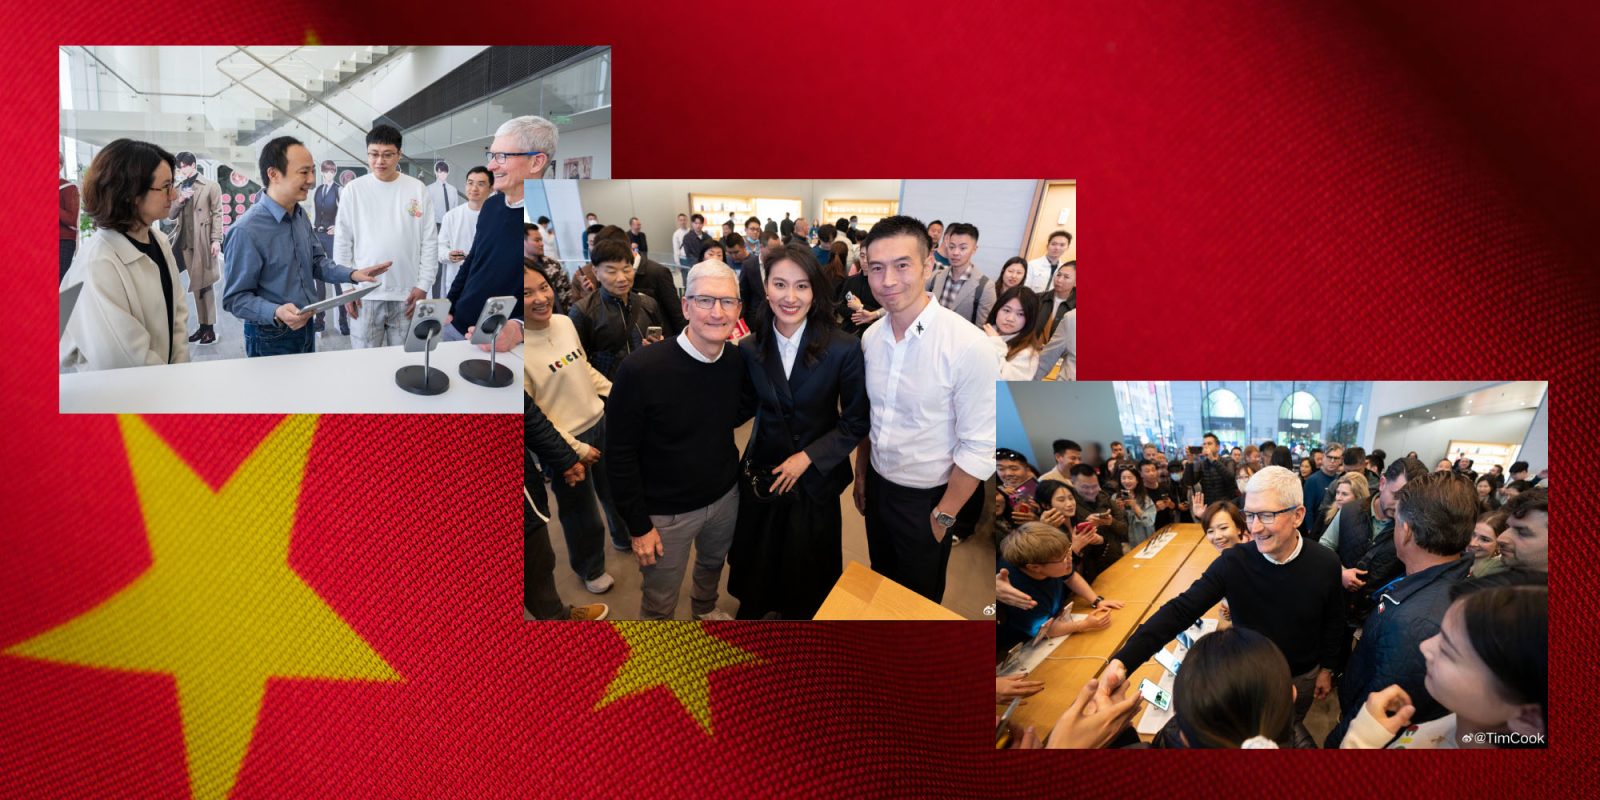 Tim Cook is in China | Photos from visit on Chinese flag background